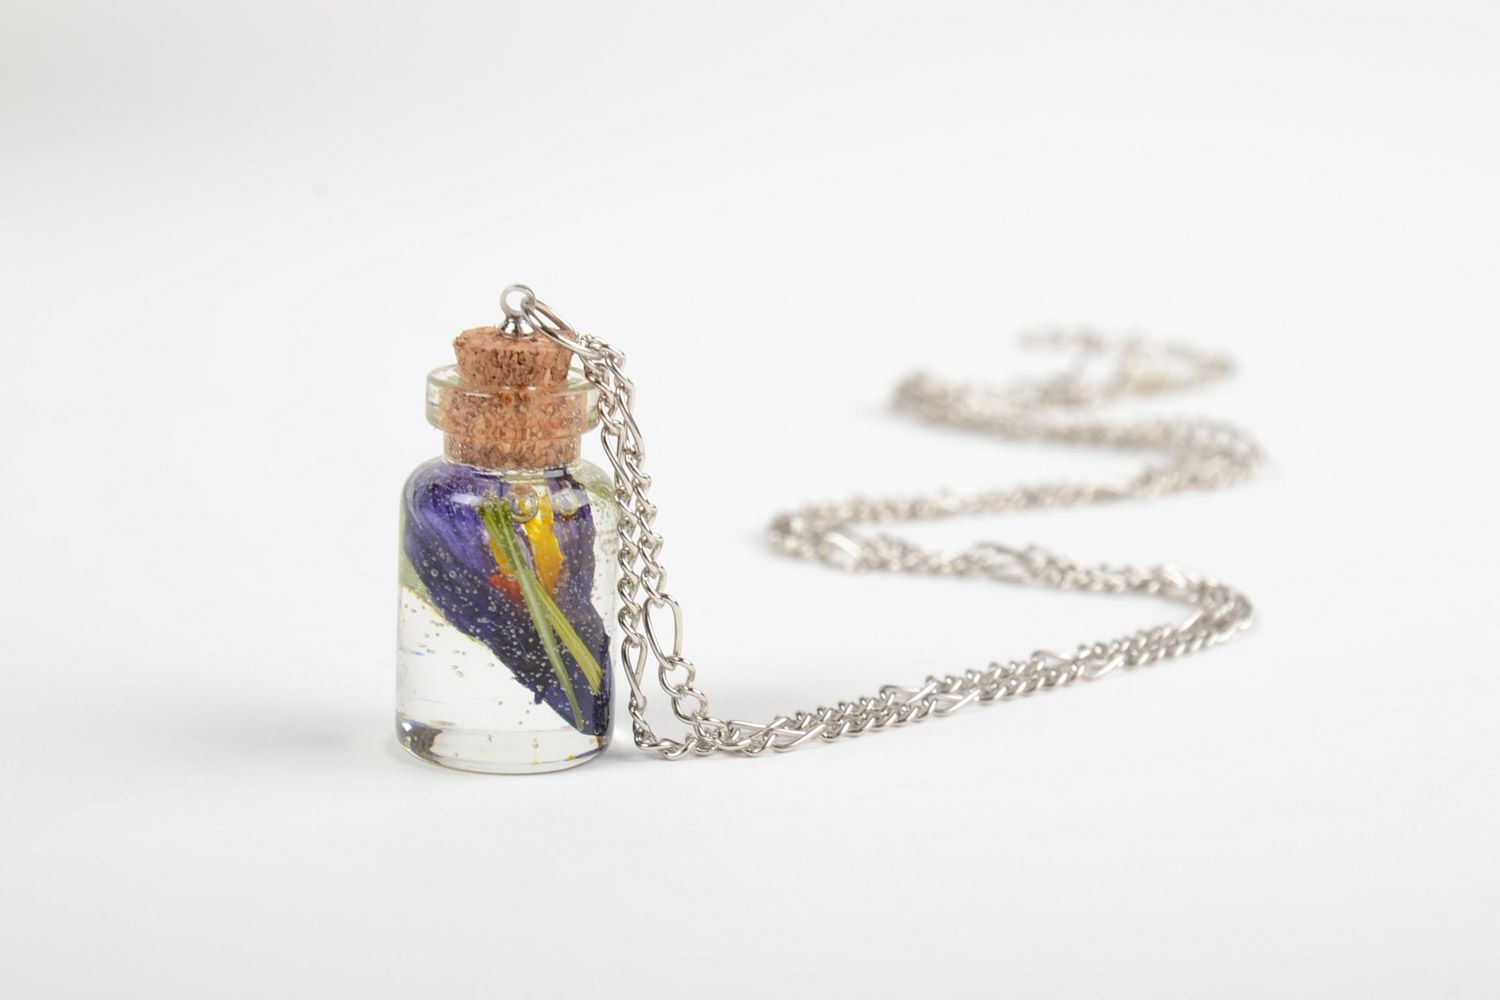 Handmade epoxy resin pendant with real flowers inside in the shape of vial photo 4